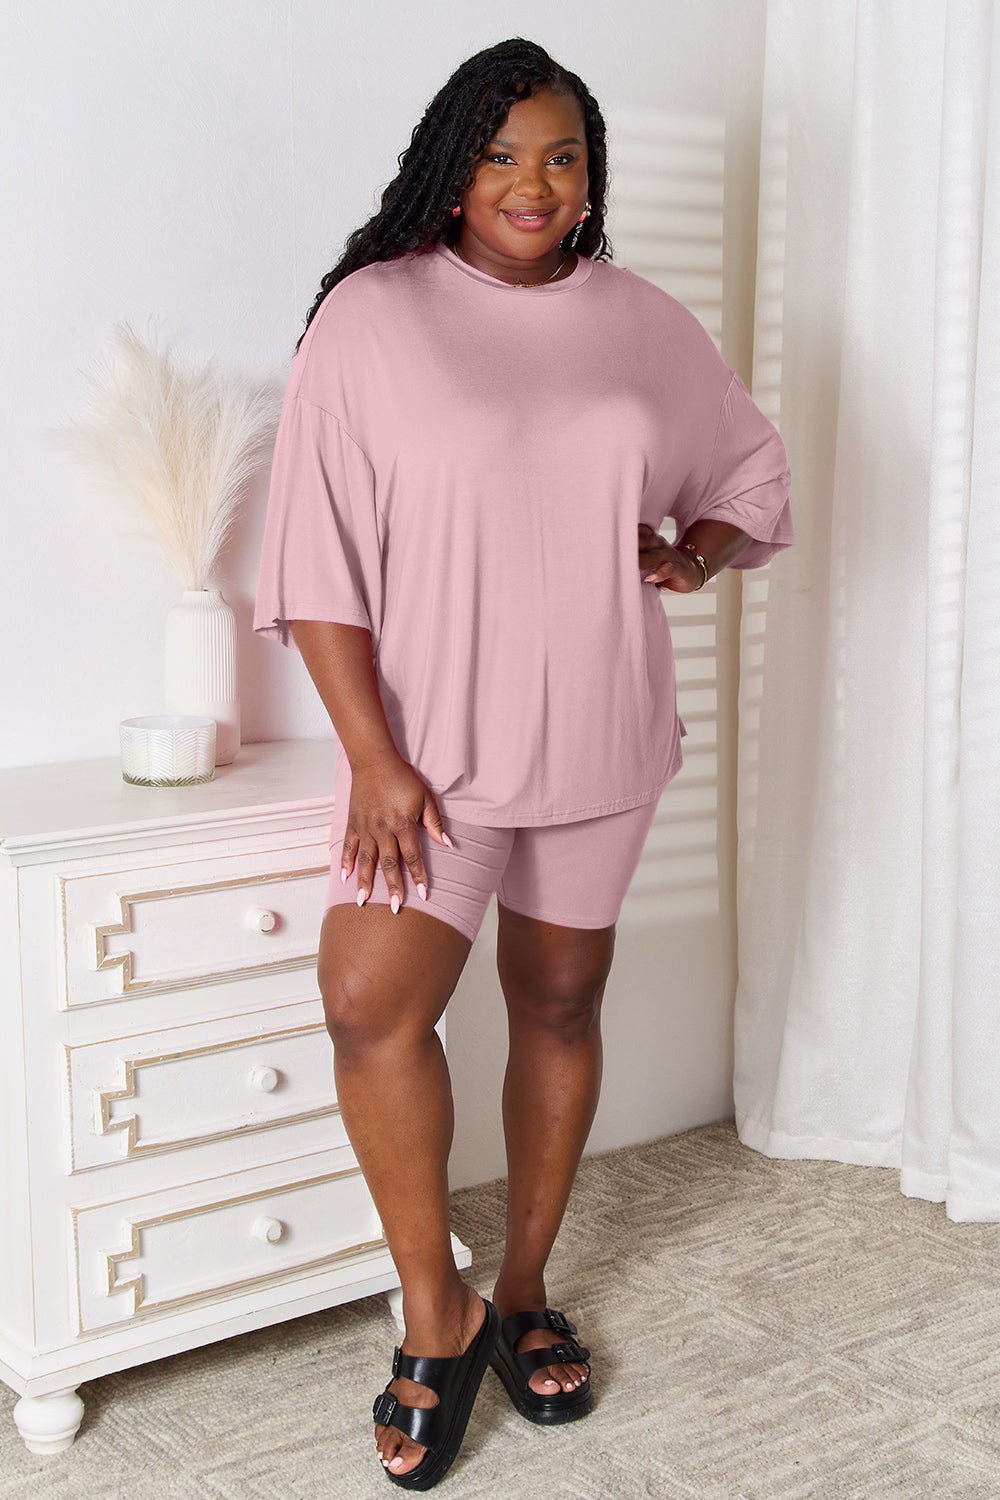 Basic Bae Full Size Soft Rayon Three-Quarter Sleeve Top and Shorts Set - Three Bears Boutique